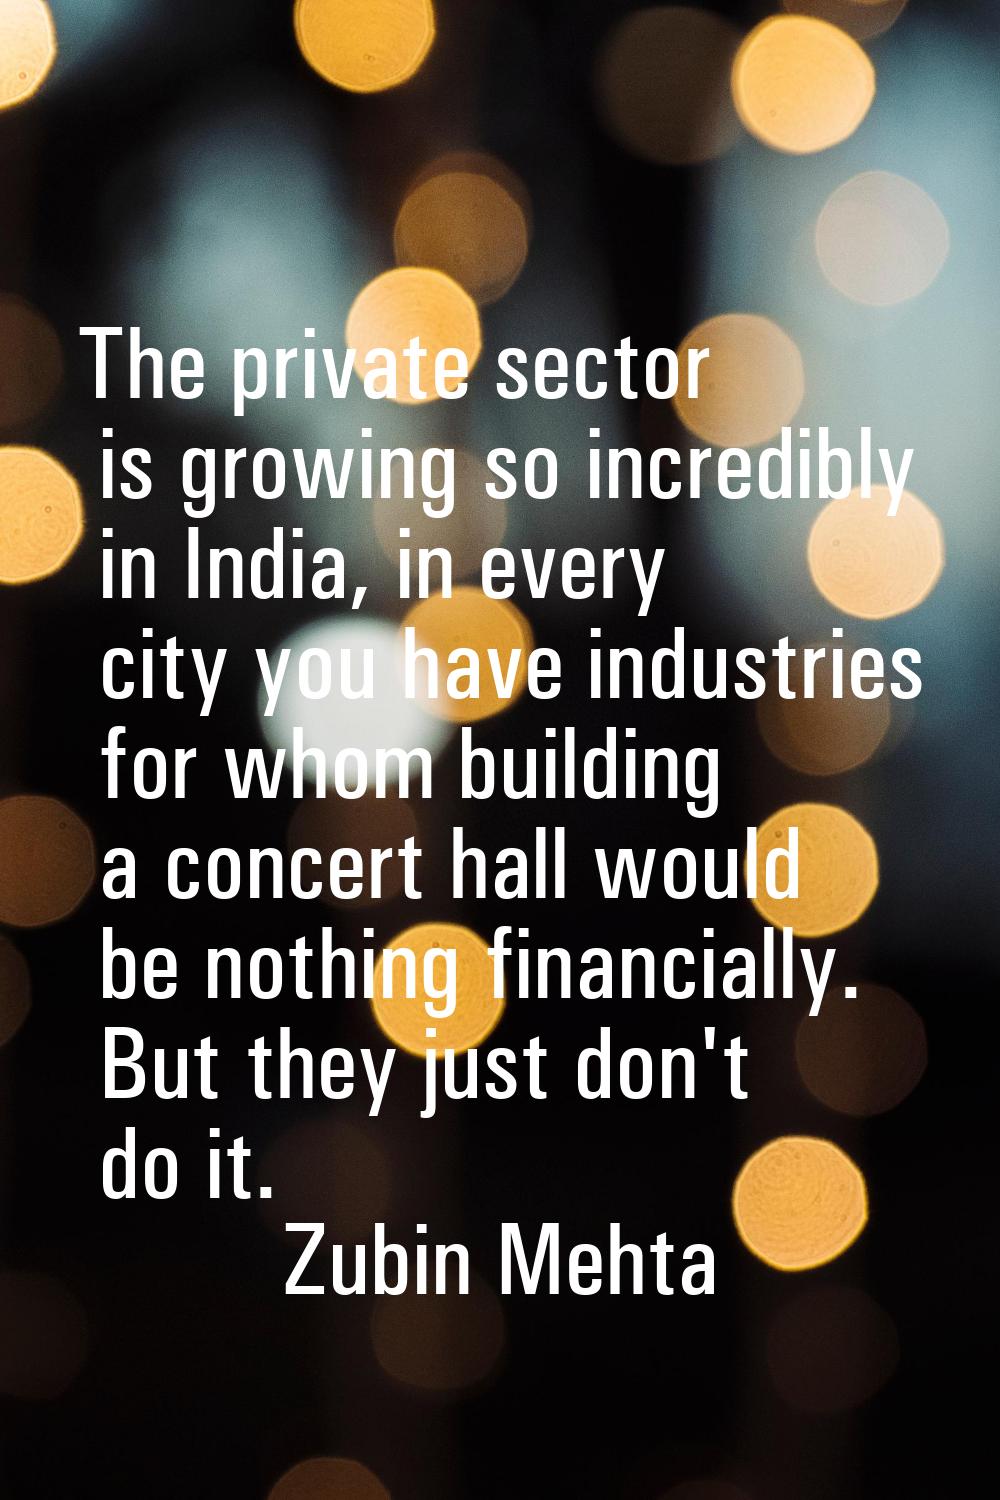 The private sector is growing so incredibly in India, in every city you have industries for whom bu